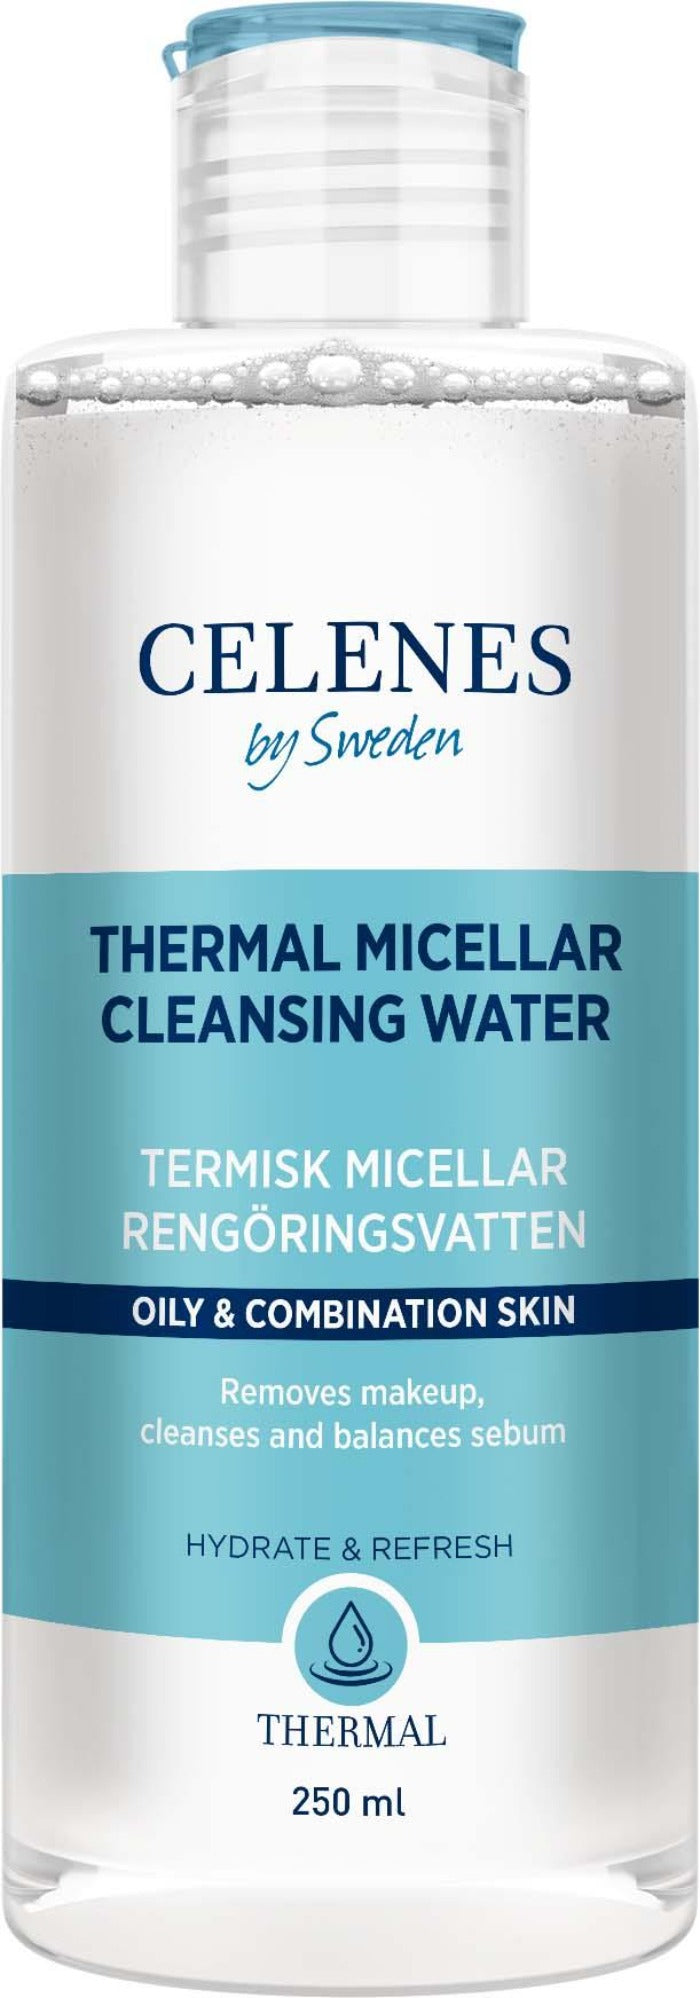 Celenes Thermal Cleansing Water Oily & Combination Skin- 250 ml